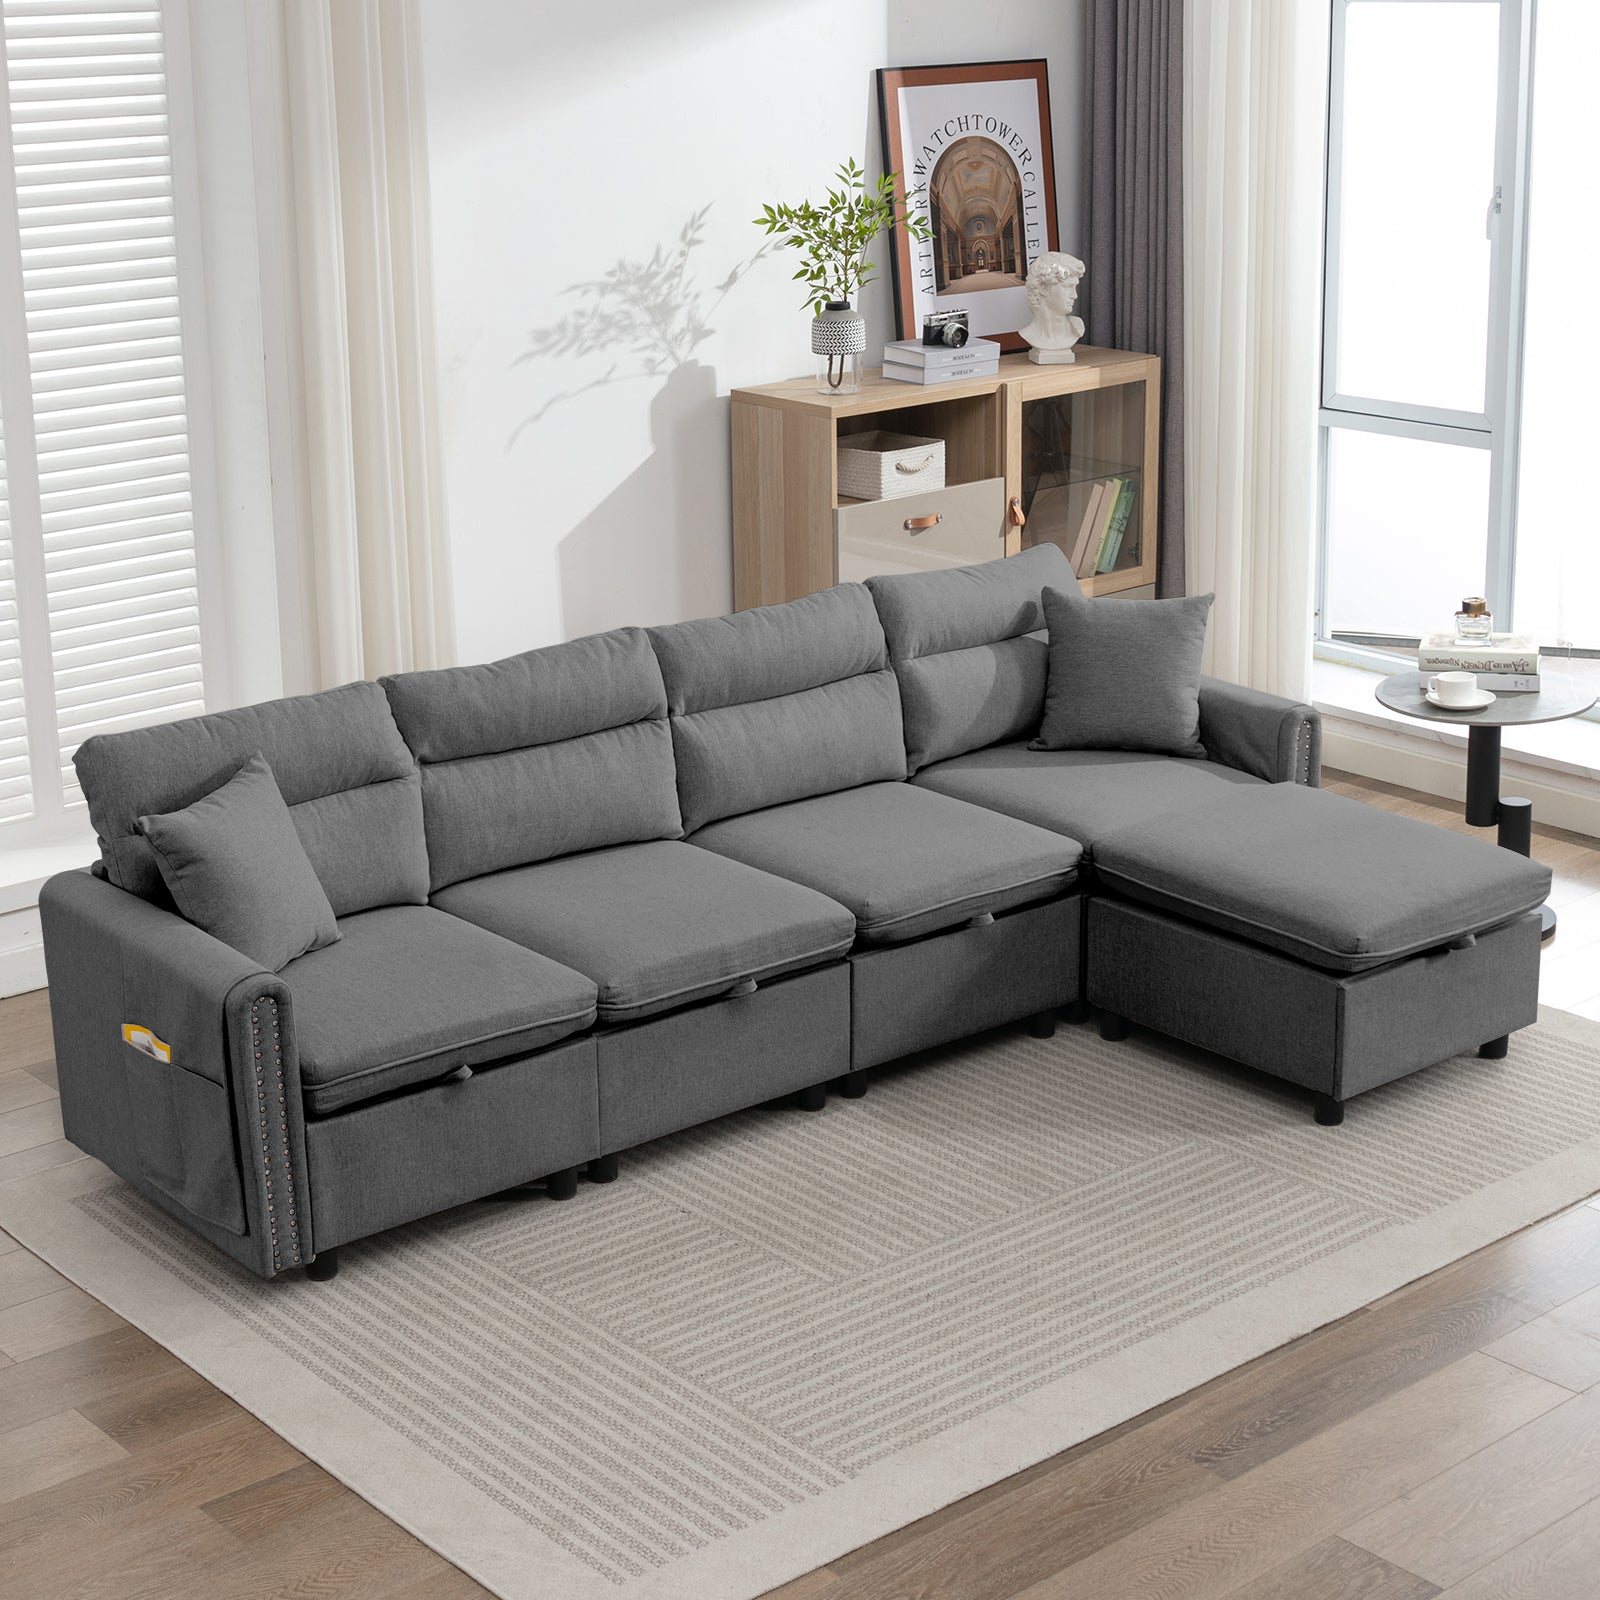 Mjkone Sectional Sofa with Storage Seat and Side Pockets, Sectional Couch with Reversible Chaise, Modular Sectional Sofa Set with Linen Upholstered, Modern Living Room Sets